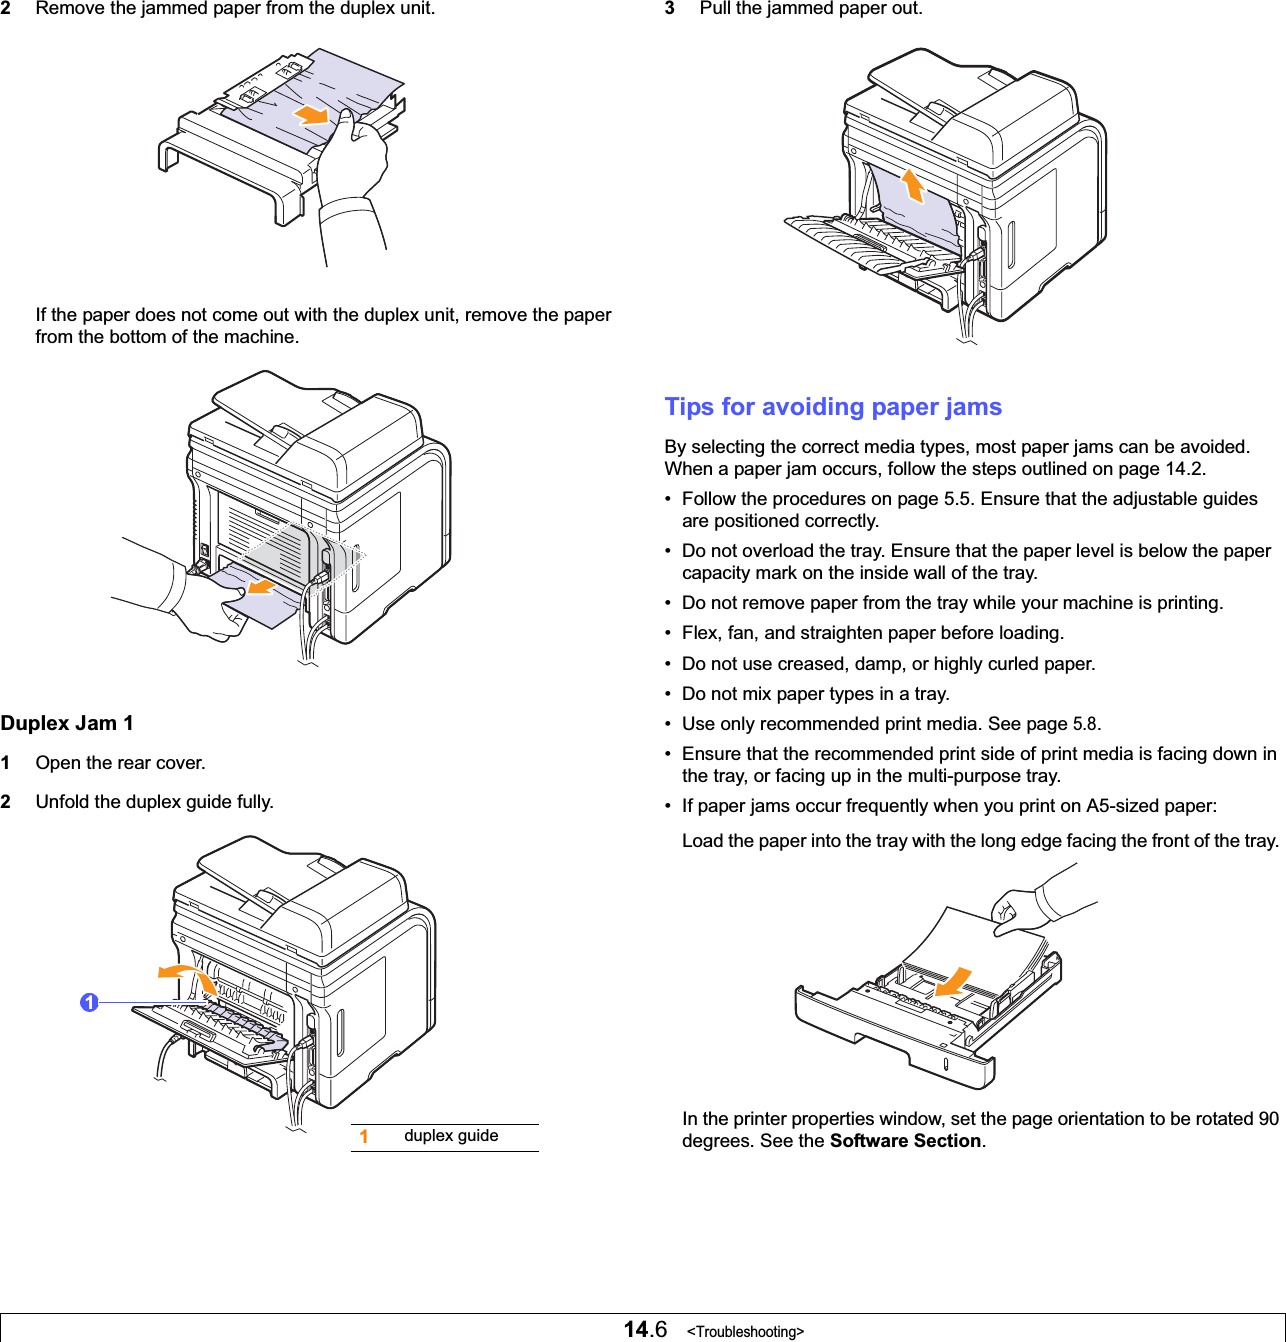 14.6   &lt;Troubleshooting&gt;2Remove the jammed paper from the duplex unit.If the paper does not come out with the duplex unit, remove the paper from the bottom of the machine.Duplex Jam 11Open the rear cover.2Unfold the duplex guide fully.11duplex guide3Pull the jammed paper out.Tips for avoiding paper jamsBy selecting the correct media types, most paper jams can be avoided. When a paper jam occurs, follow the steps outlined on page 14.2. • Follow the procedures on page 5.5. Ensure that the adjustable guides are positioned correctly.• Do not overload the tray. Ensure that the paper level is below the paper capacity mark on the inside wall of the tray.• Do not remove paper from the tray while your machine is printing.• Flex, fan, and straighten paper before loading. • Do not use creased, damp, or highly curled paper.• Do not mix paper types in a tray.• Use only recommended print media. See page 5.8.• Ensure that the recommended print side of print media is facing down in the tray, or facing up in the multi-purpose tray.• If paper jams occur frequently when you print on A5-sized paper:Load the paper into the tray with the long edge facing the front of the tray. In the printer properties window, set the page orientation to be rotated 90 degrees. See the Software Section.